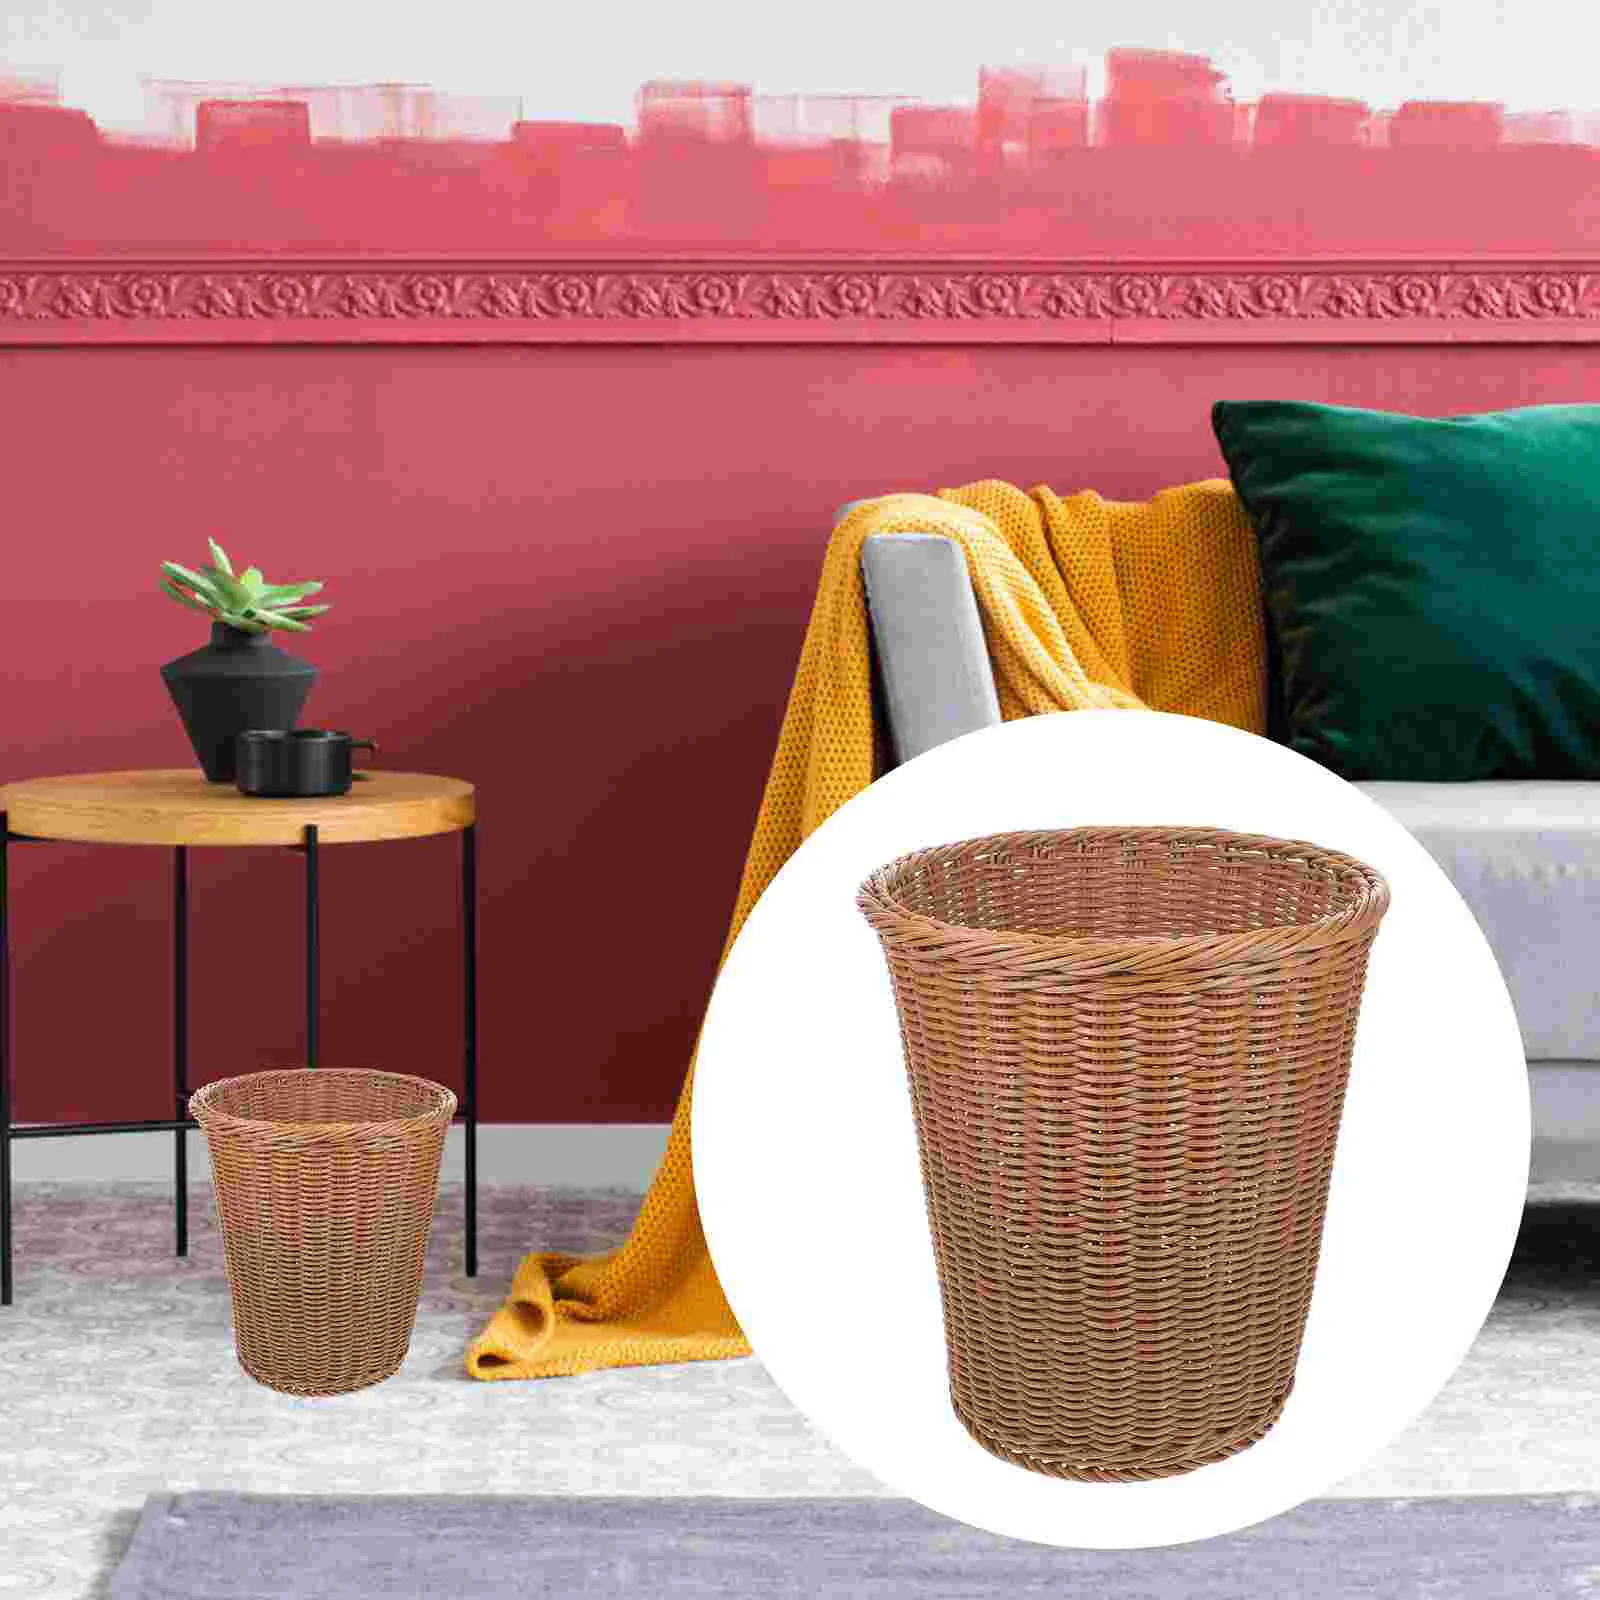 

Trash Can Basket Rattan Woven Bin Waste Garbage Container Wicker Pot Flower Rubbish Seagrass Hyacinth Water Storage Laundry